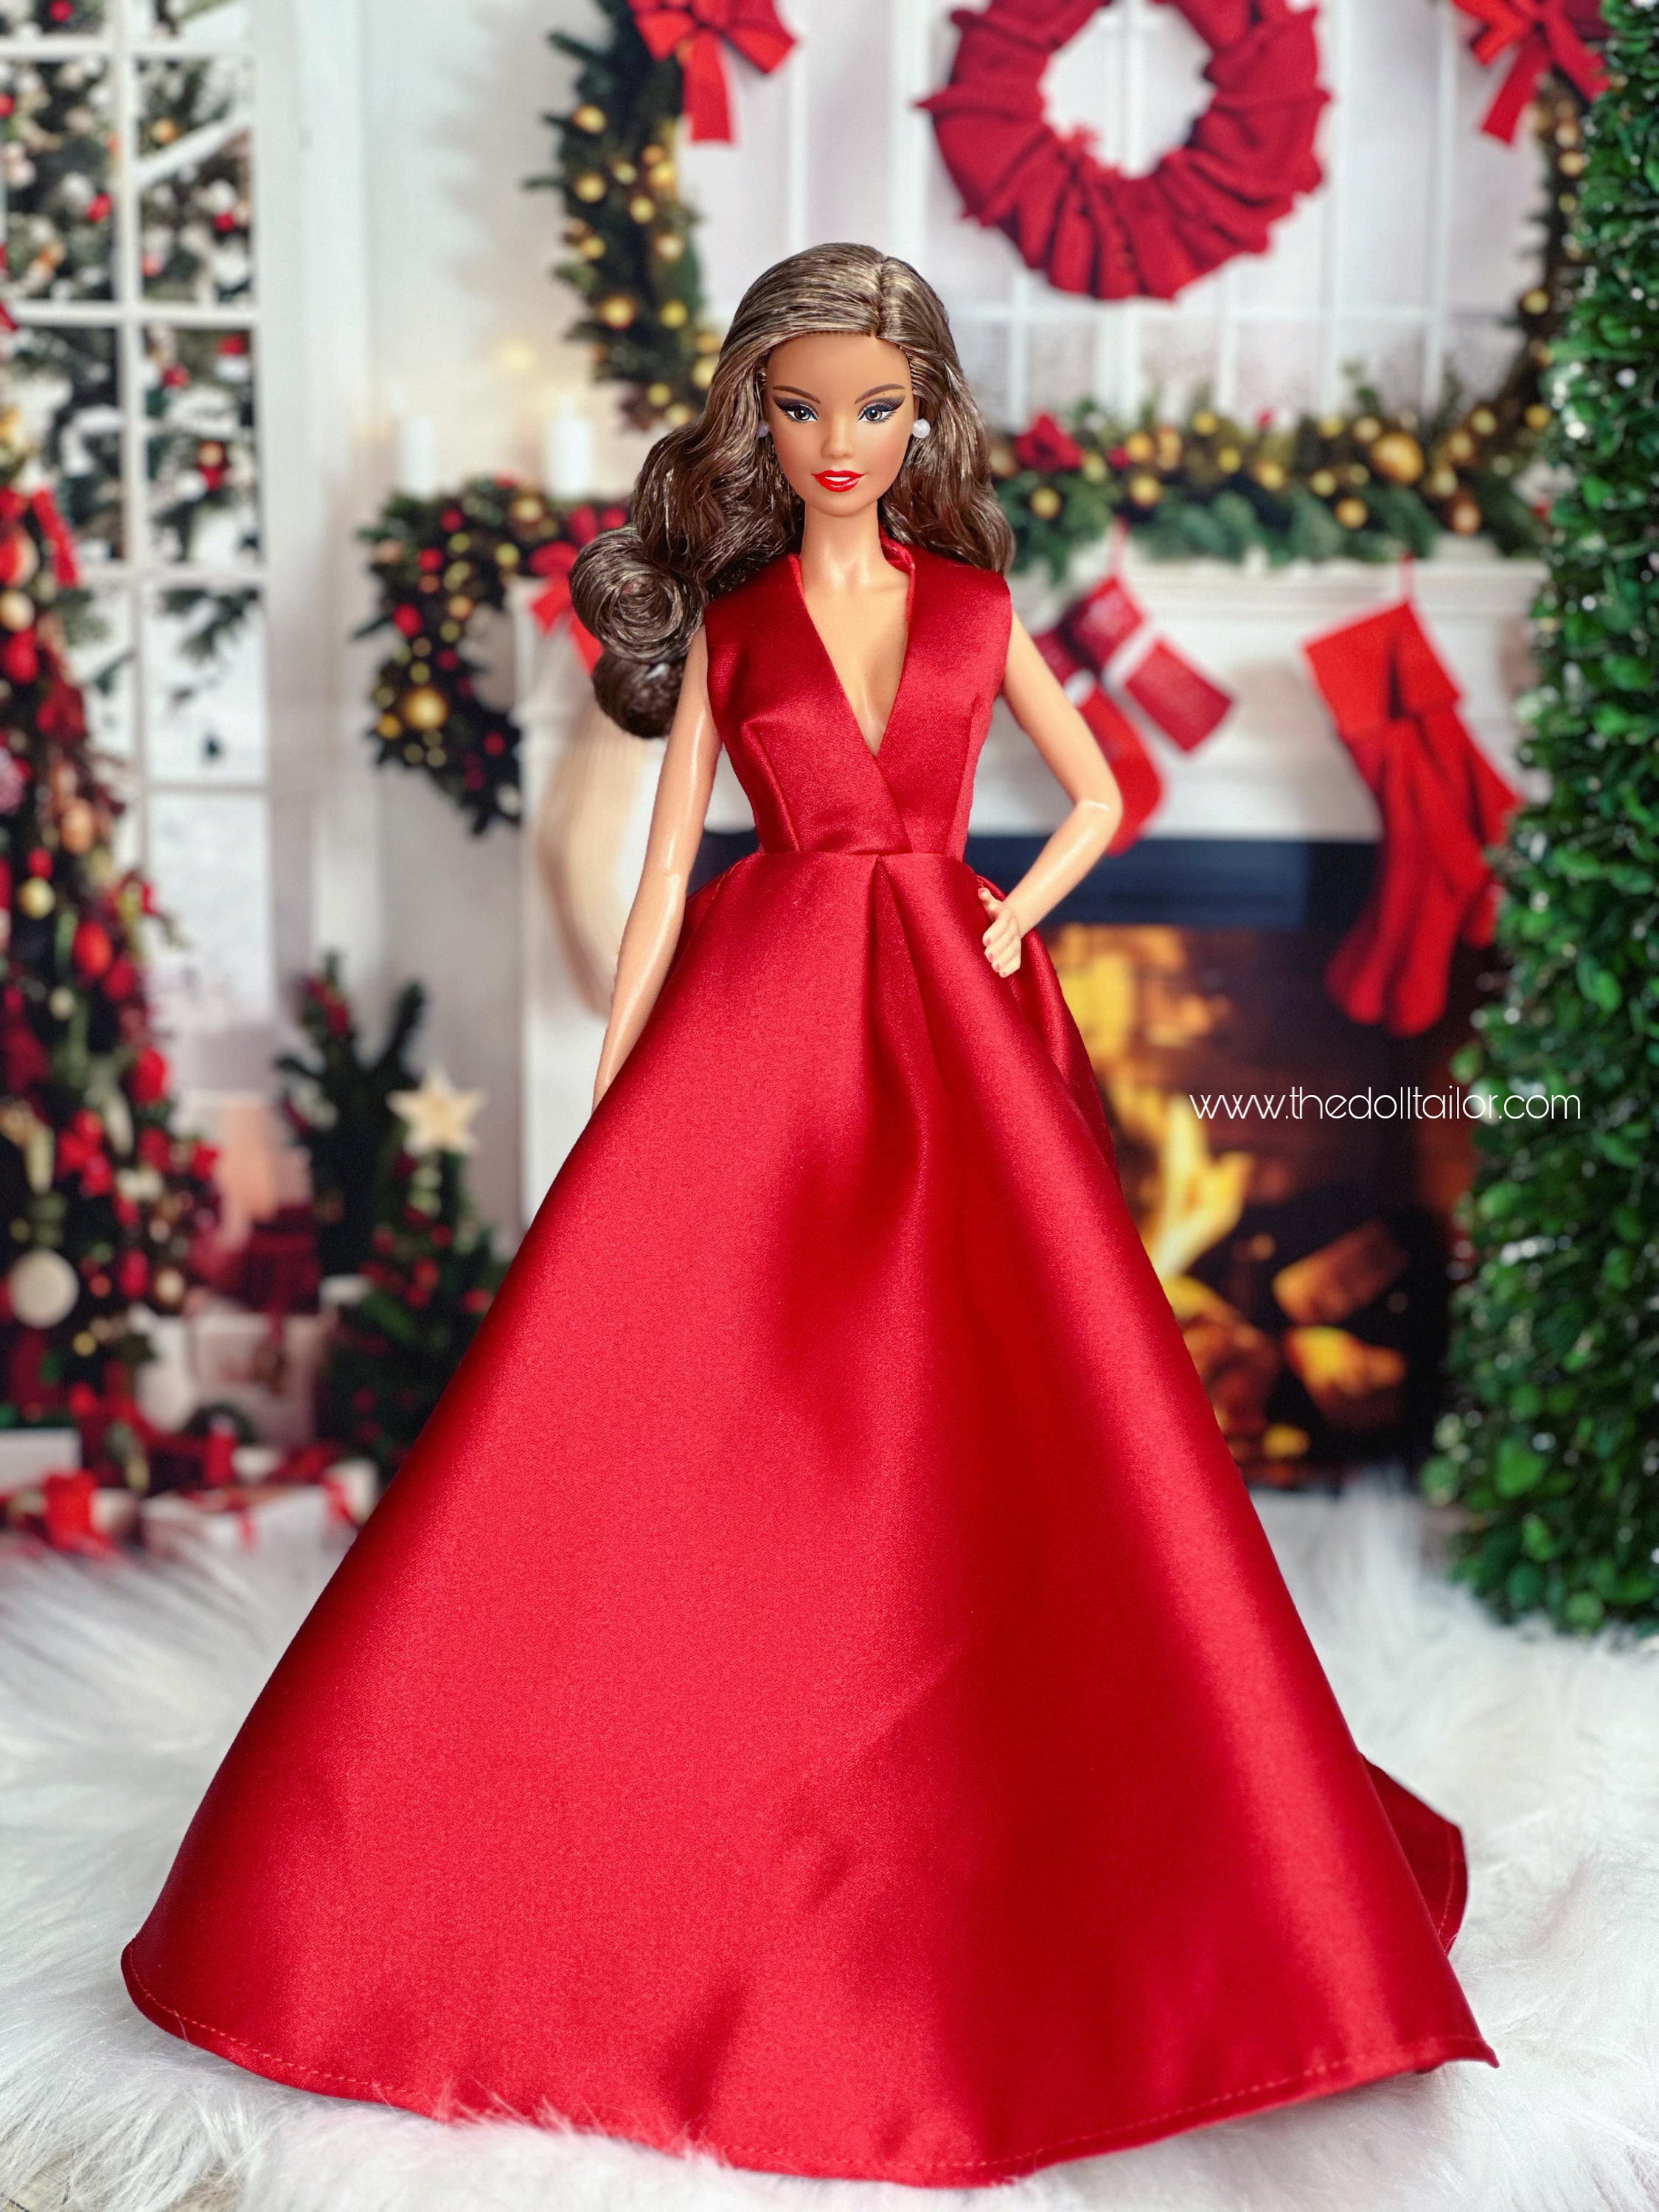 Barbie Holiday Doll | The Entertainer